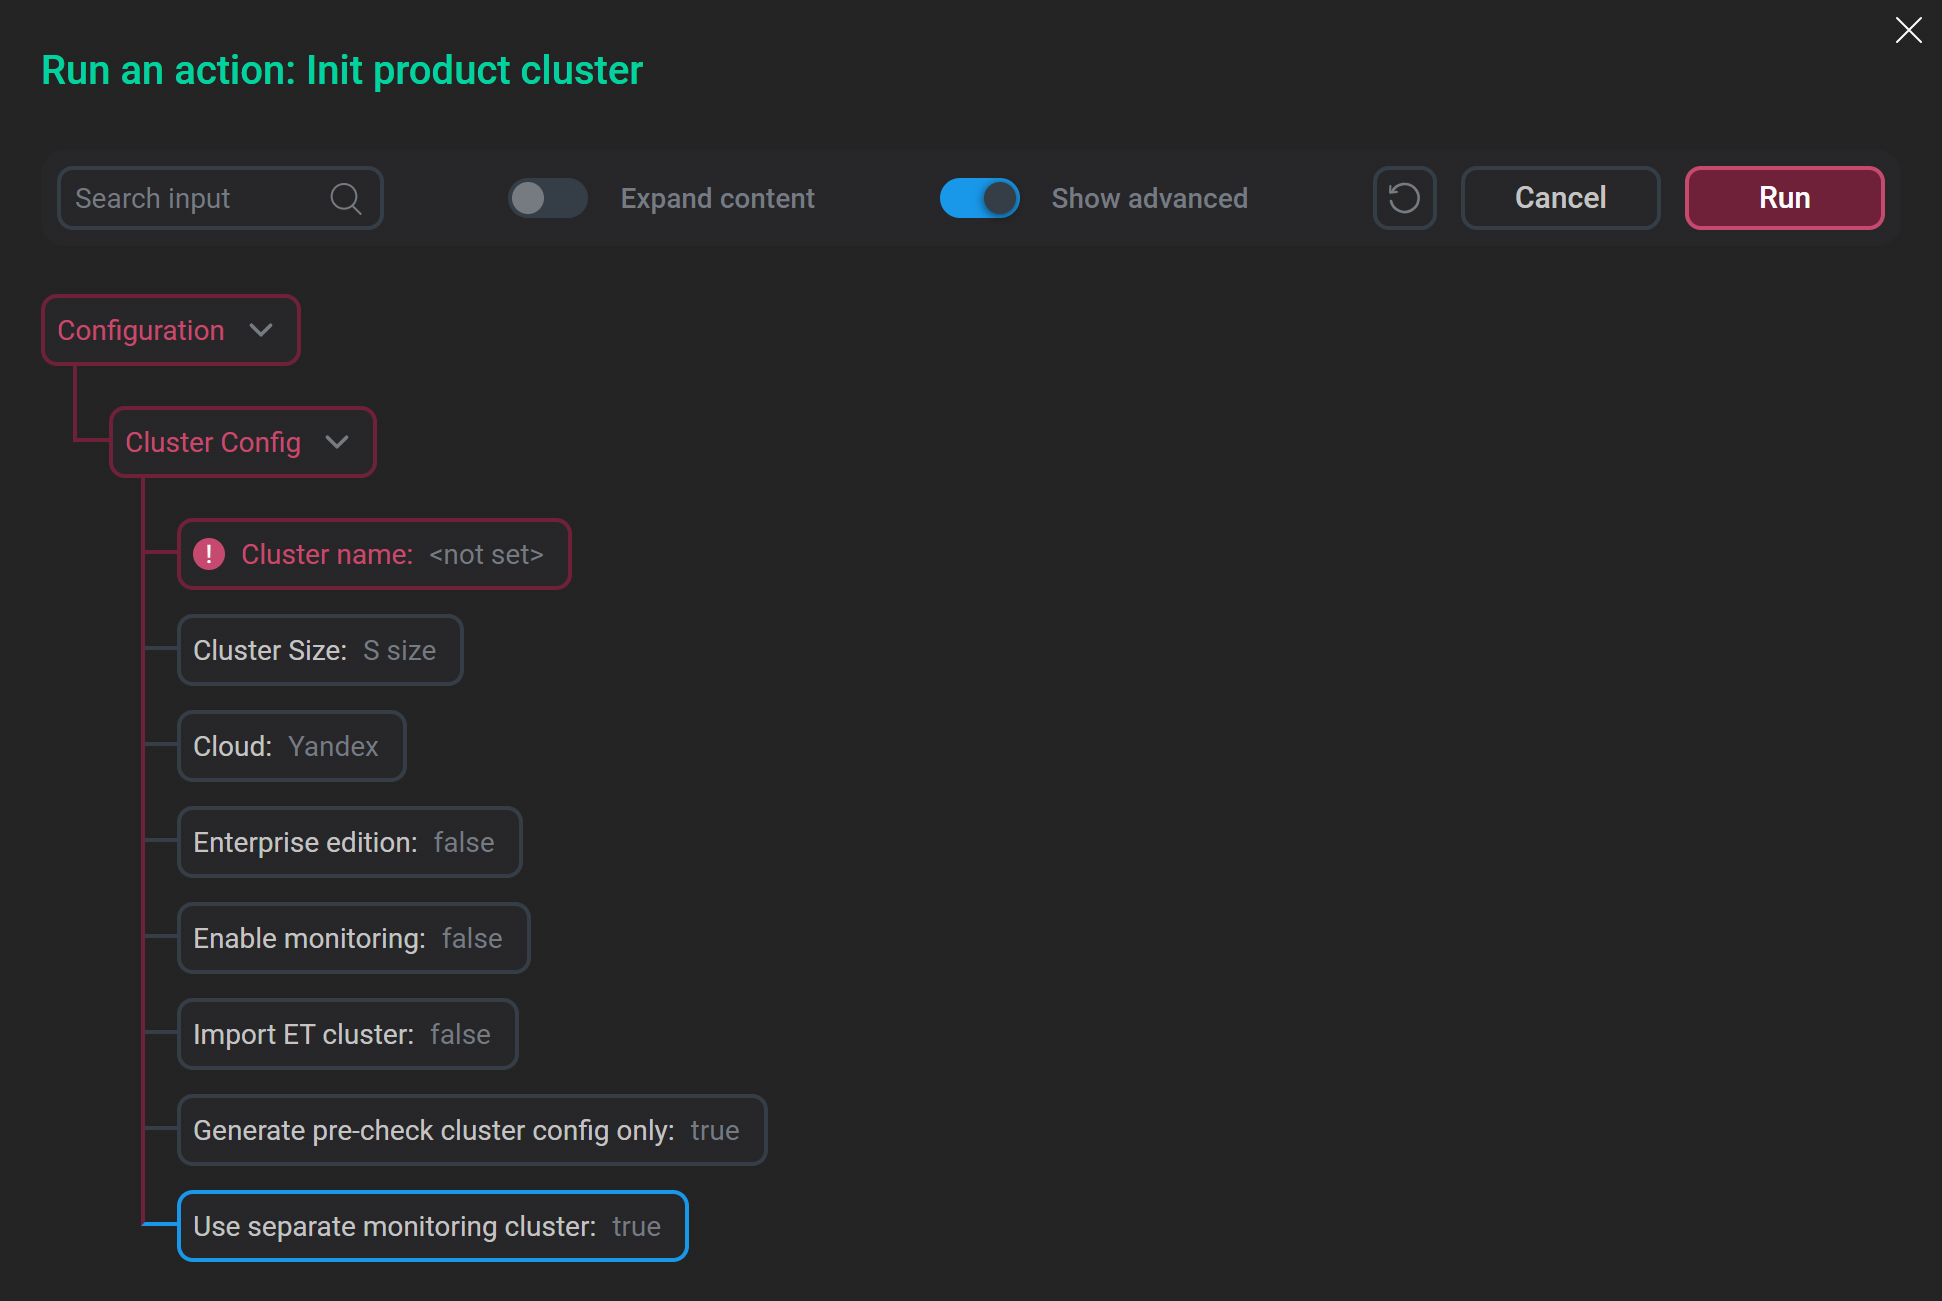 Configure a cluster to be created